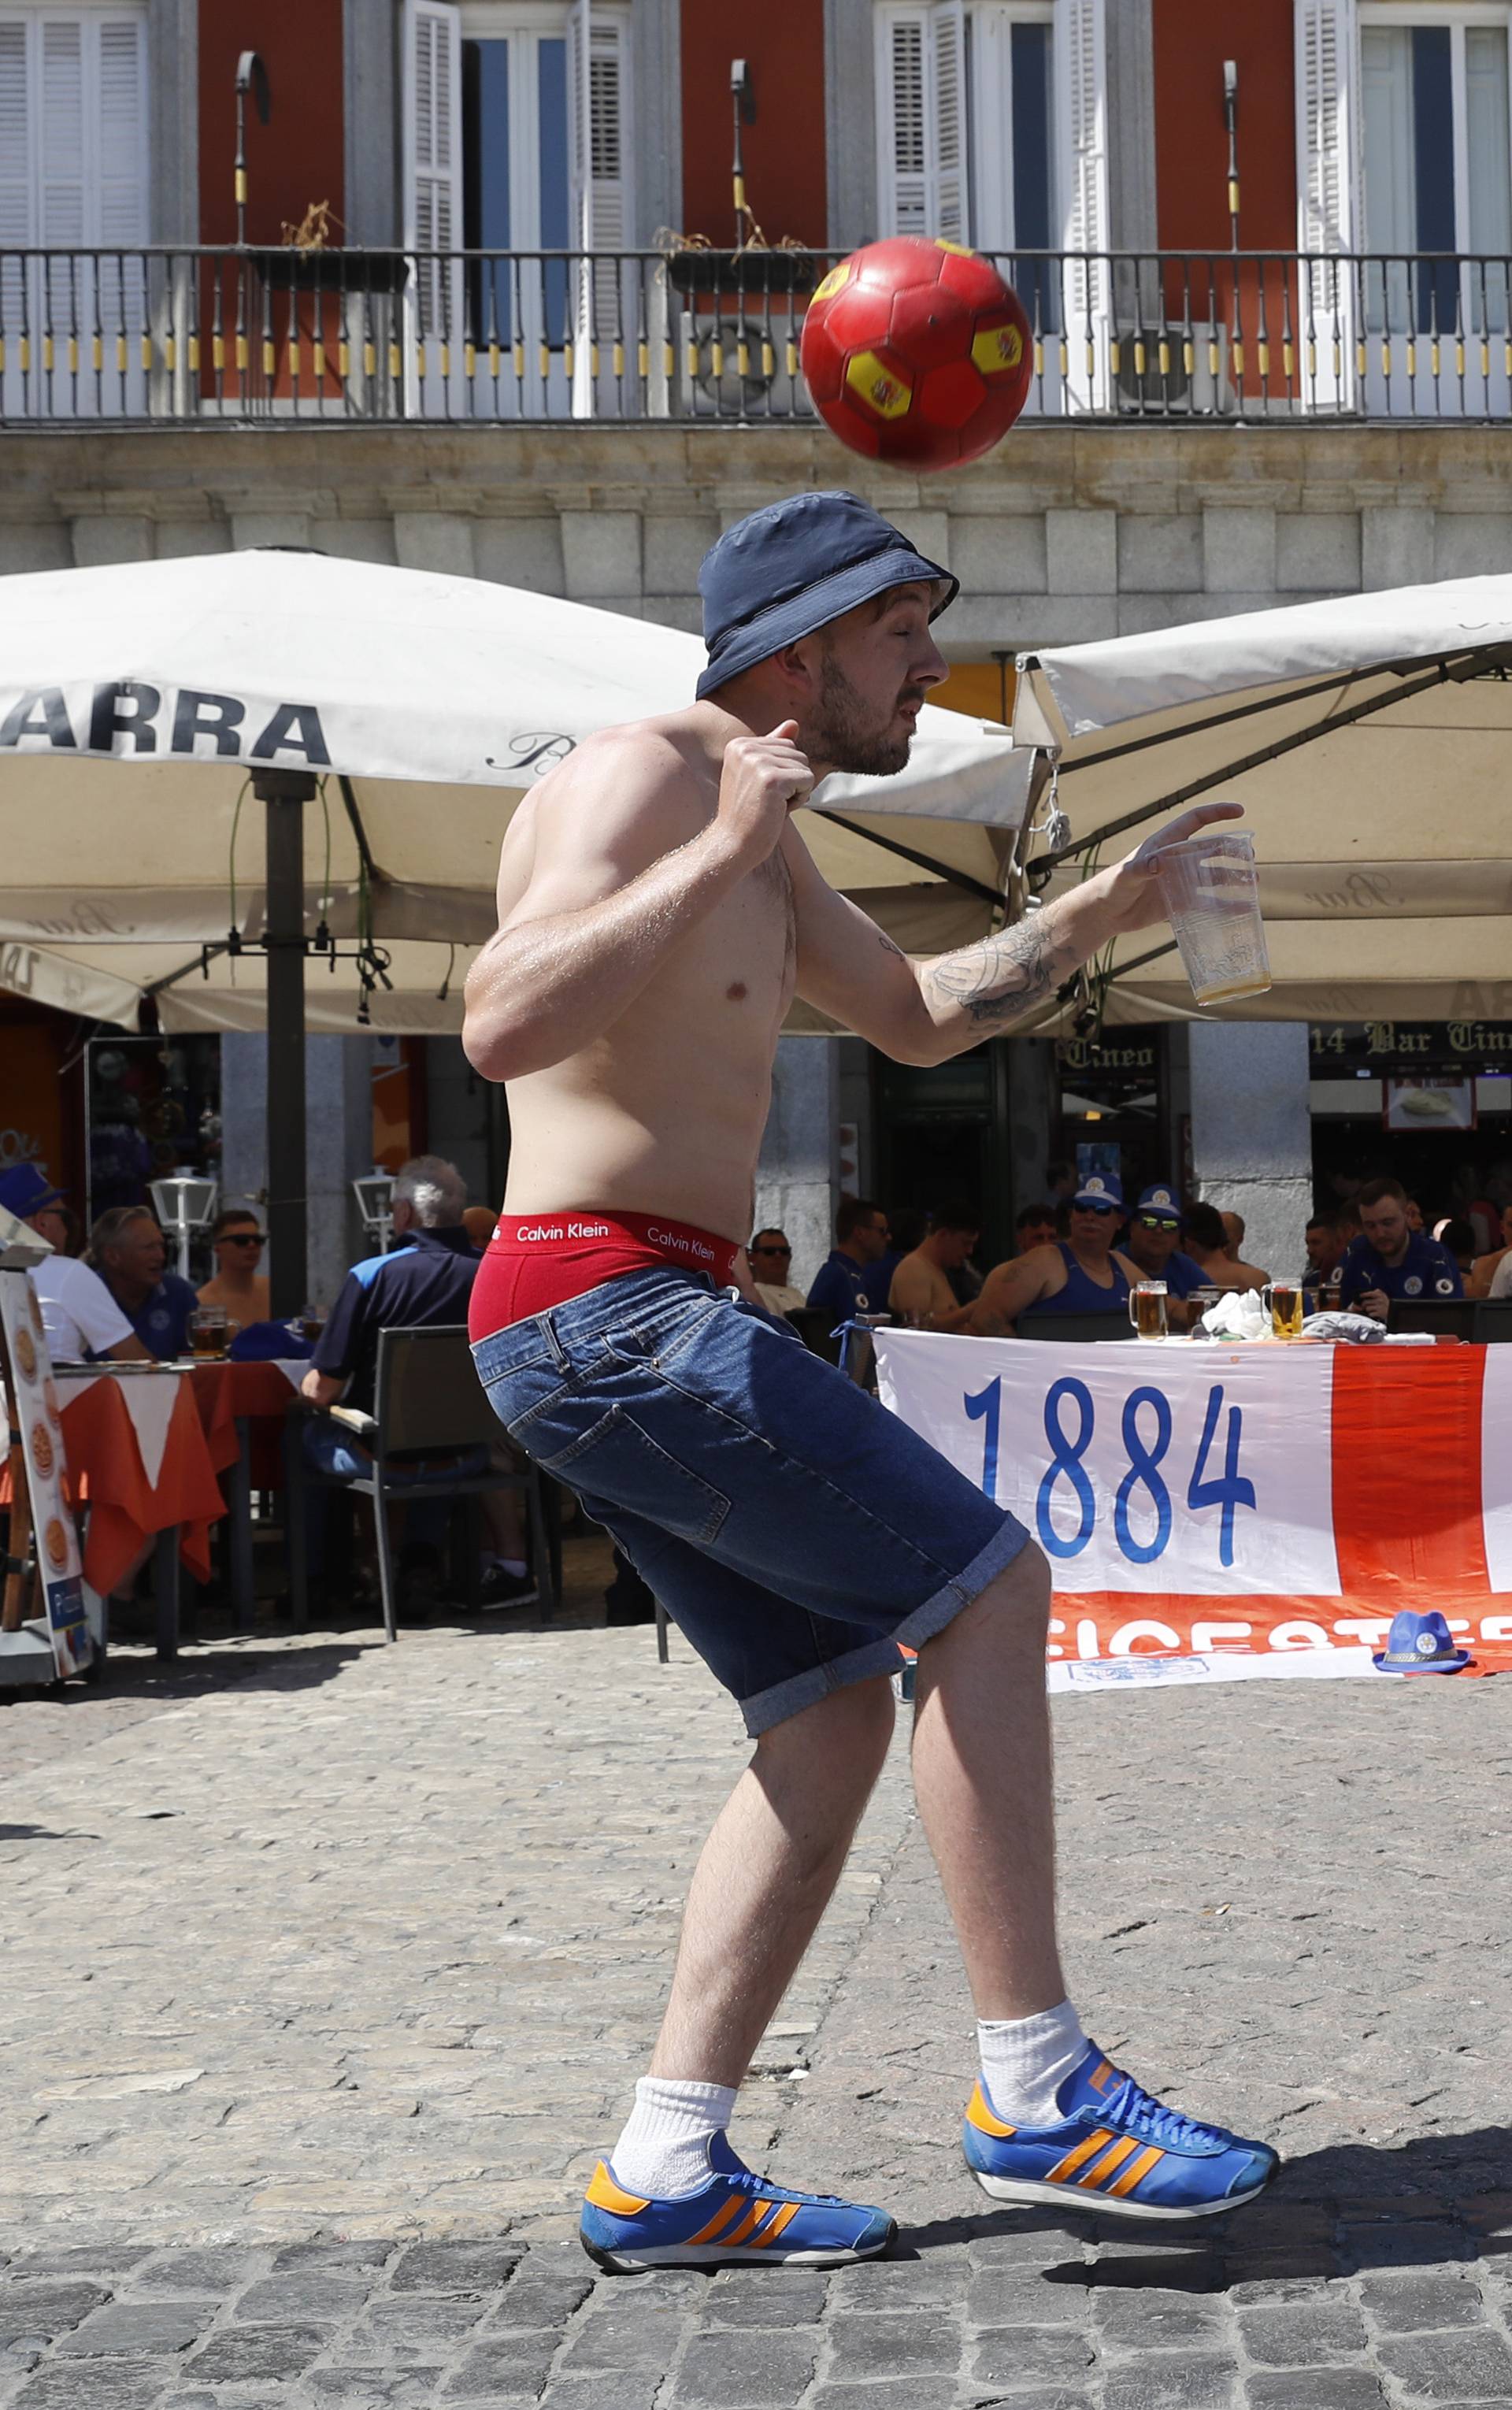 Fans play football in the Plaza Mayor before the match